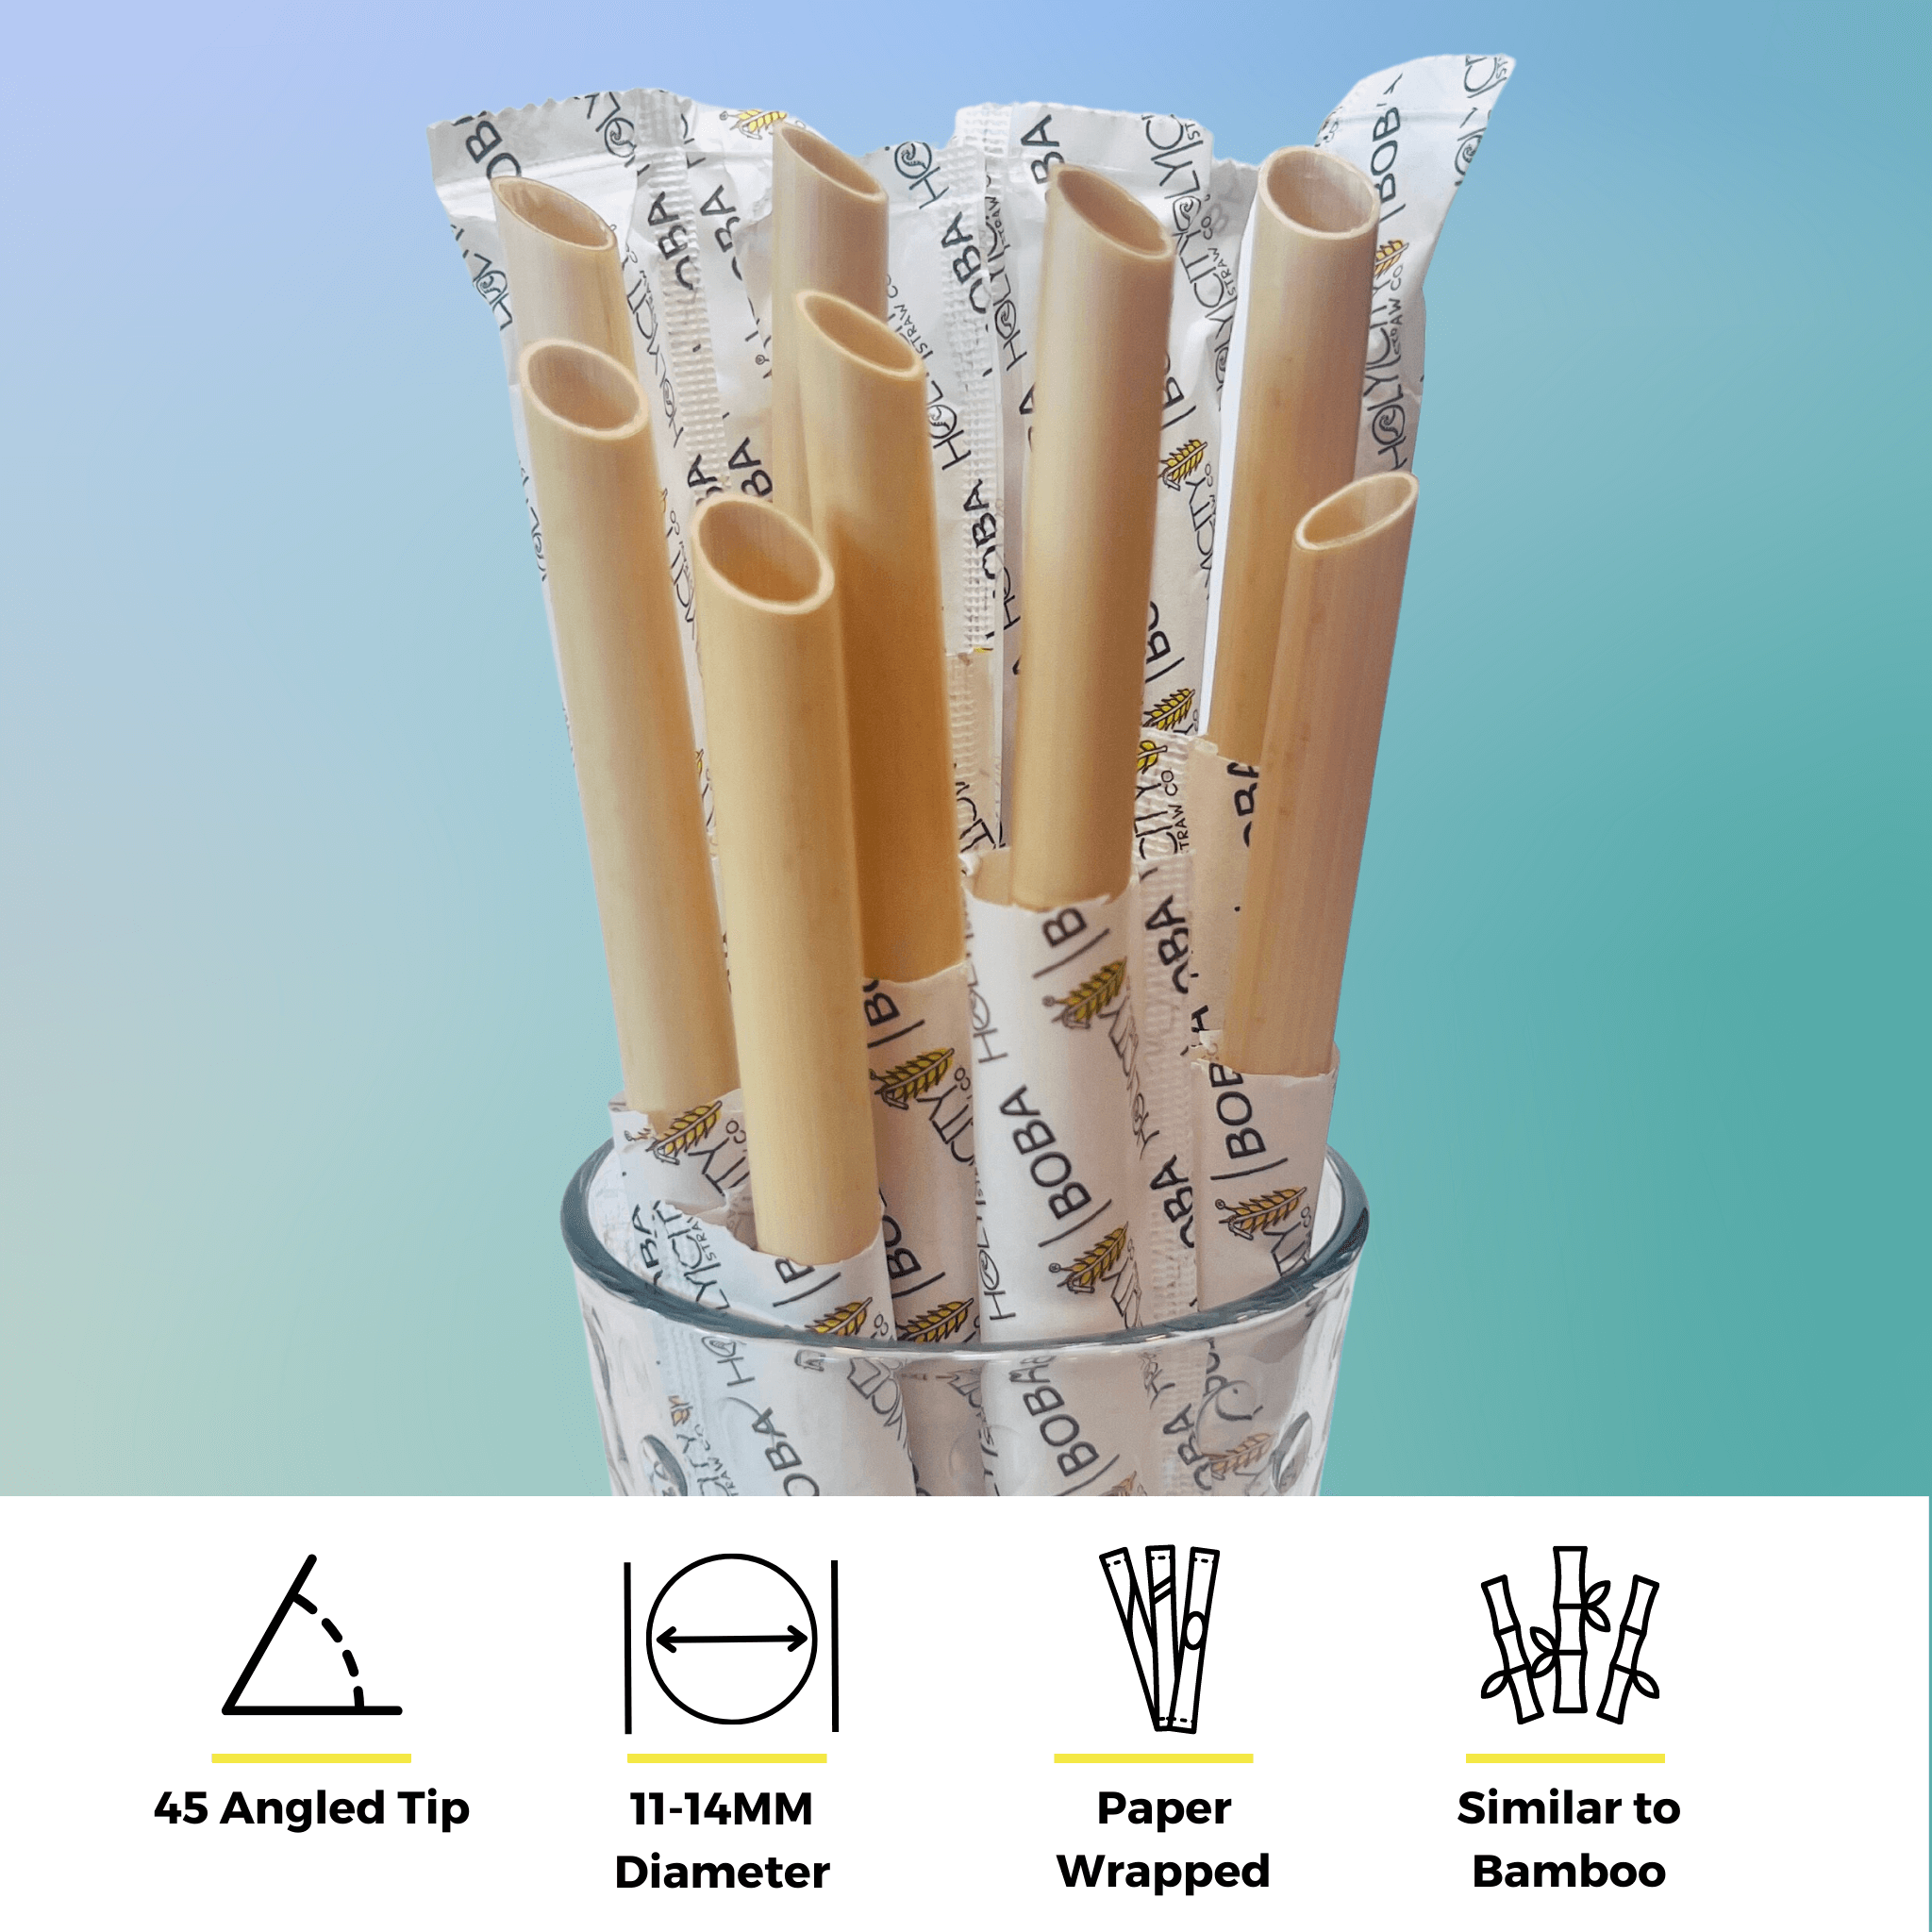 Reusable Drinking Straws : 18 inches long, large diameter adapted straws